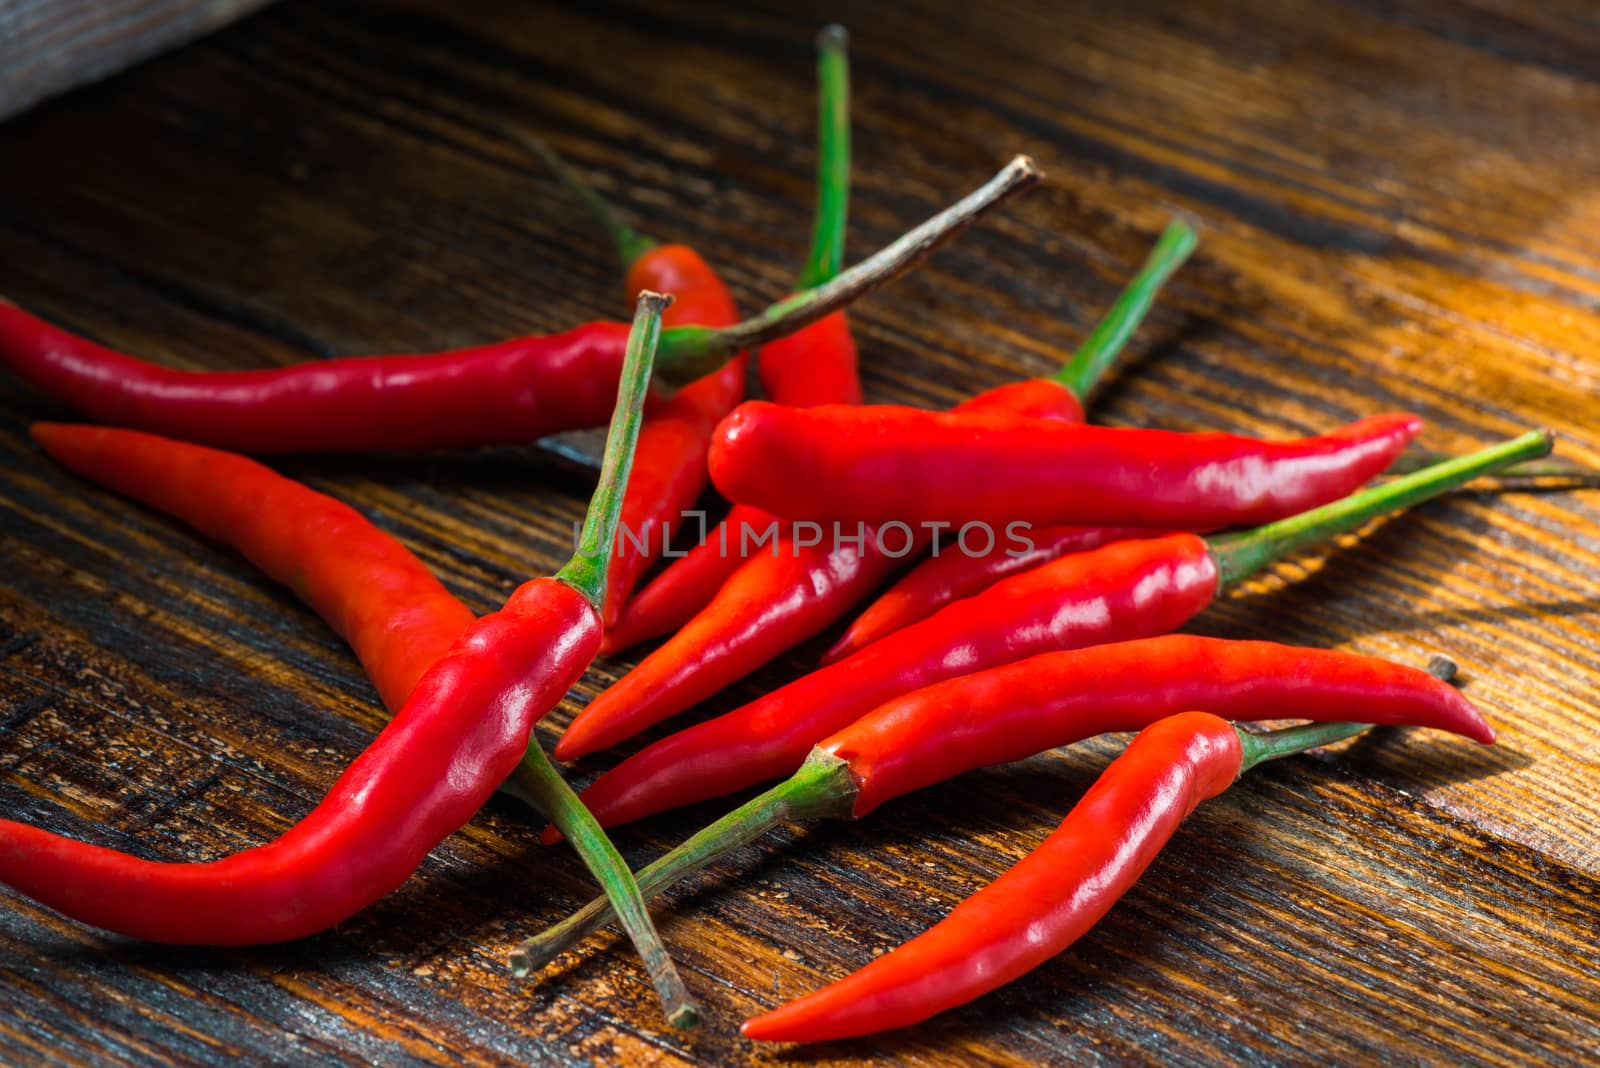 Pile of Mexican mini chili peppers on wooden background. Burning seasoning